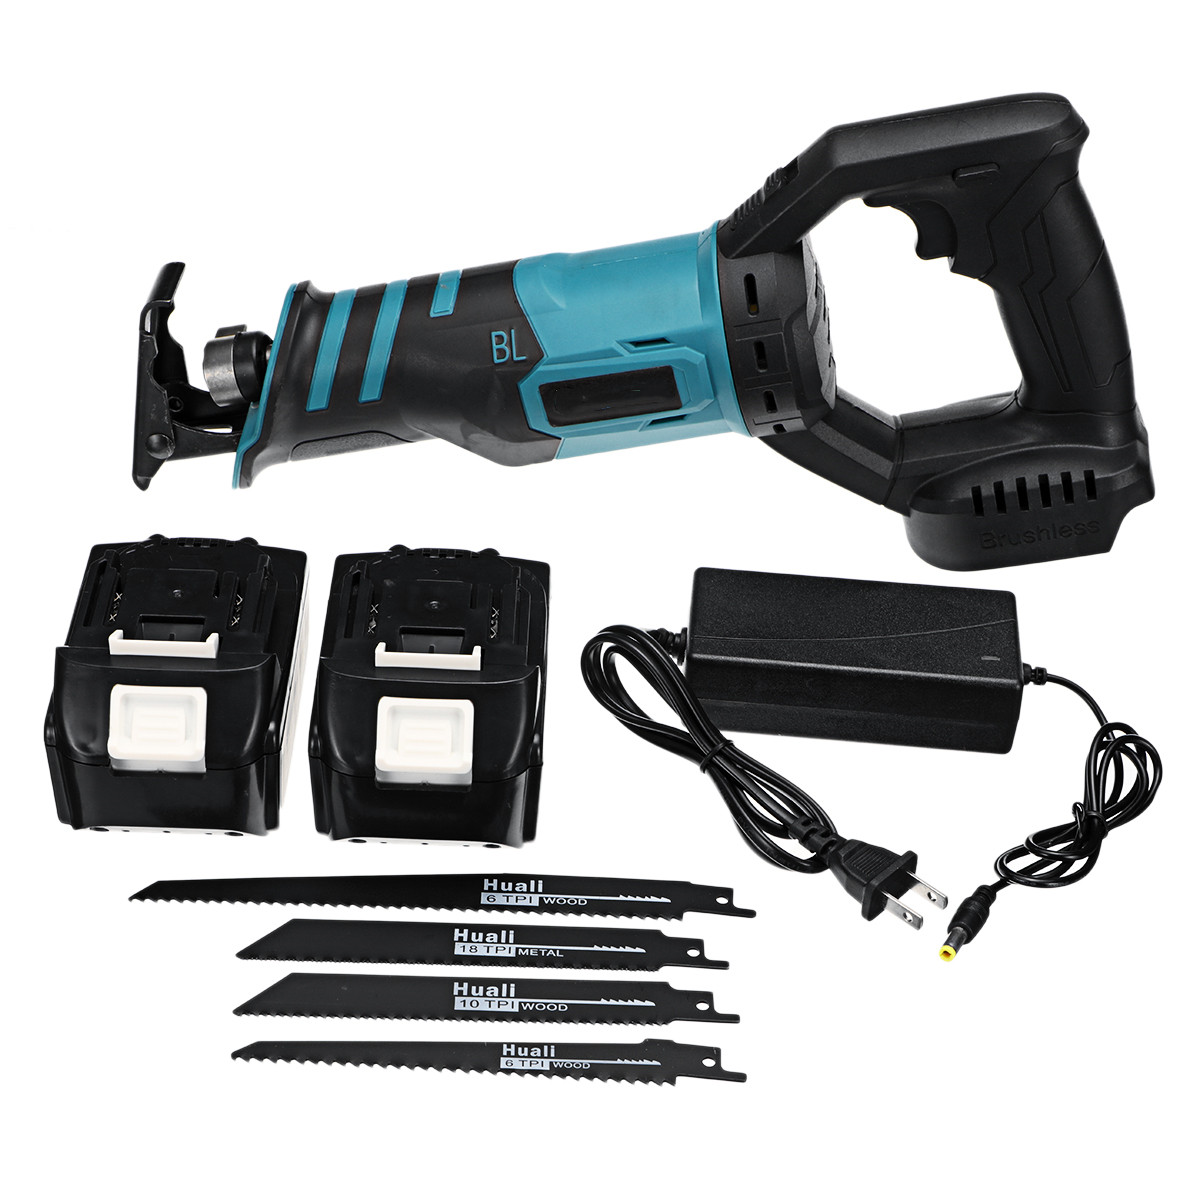 288VF-1200W-Electric-Reciprocating-Saw-Cordless-Chainsaw-One-Hand-Saw-Cutting-Woodworking-Tools-W-1--1874831-4